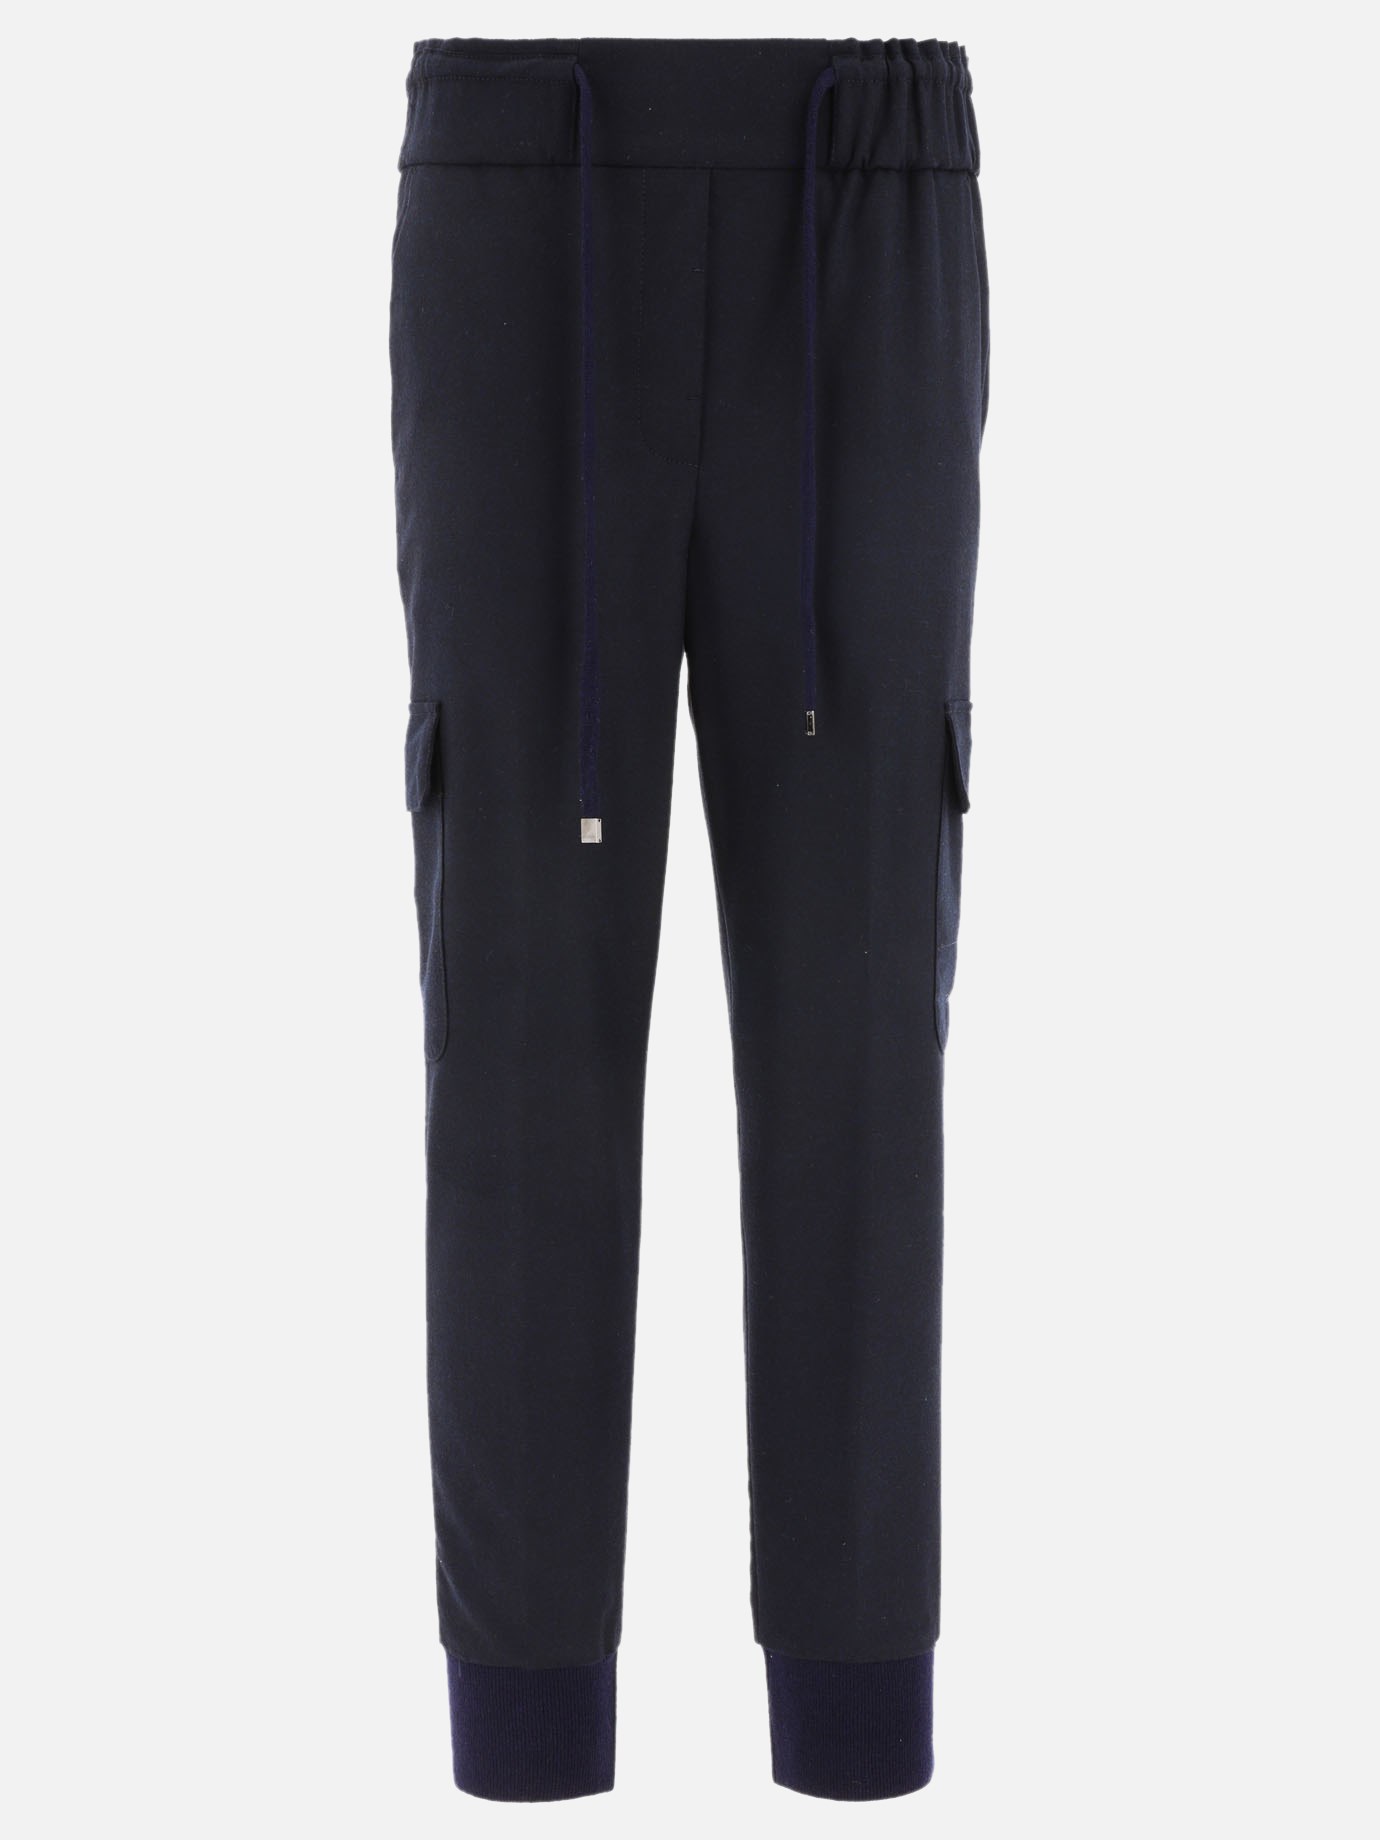 Joggers with drawstringby Peserico - 0